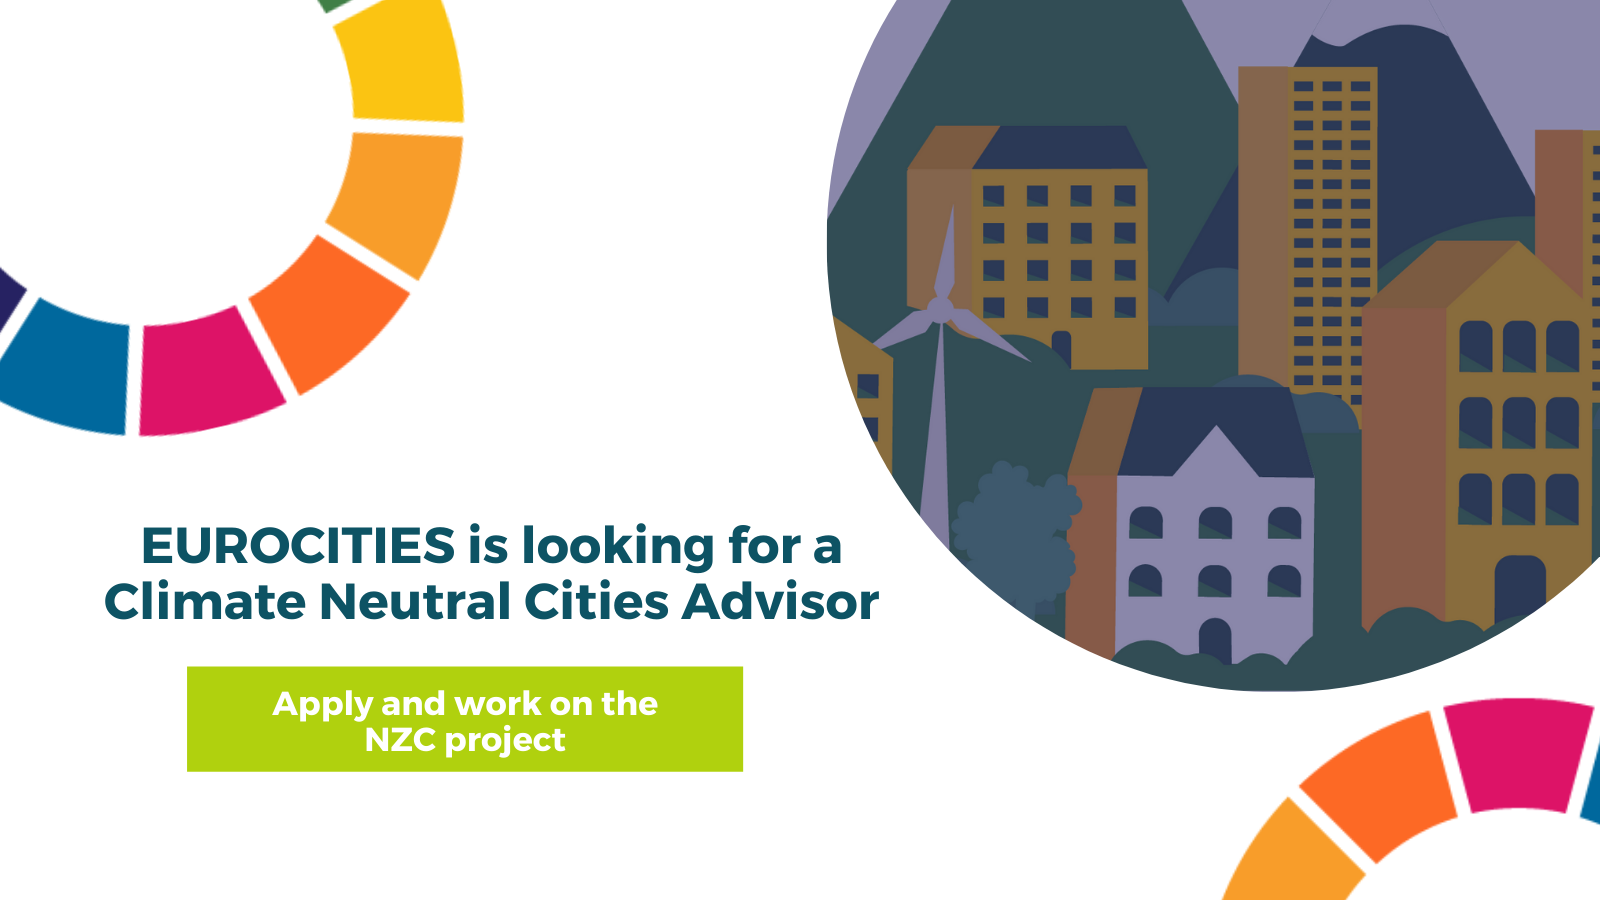 Eurocities is looking for a Climate Neutral Cities Advisor to work on ...